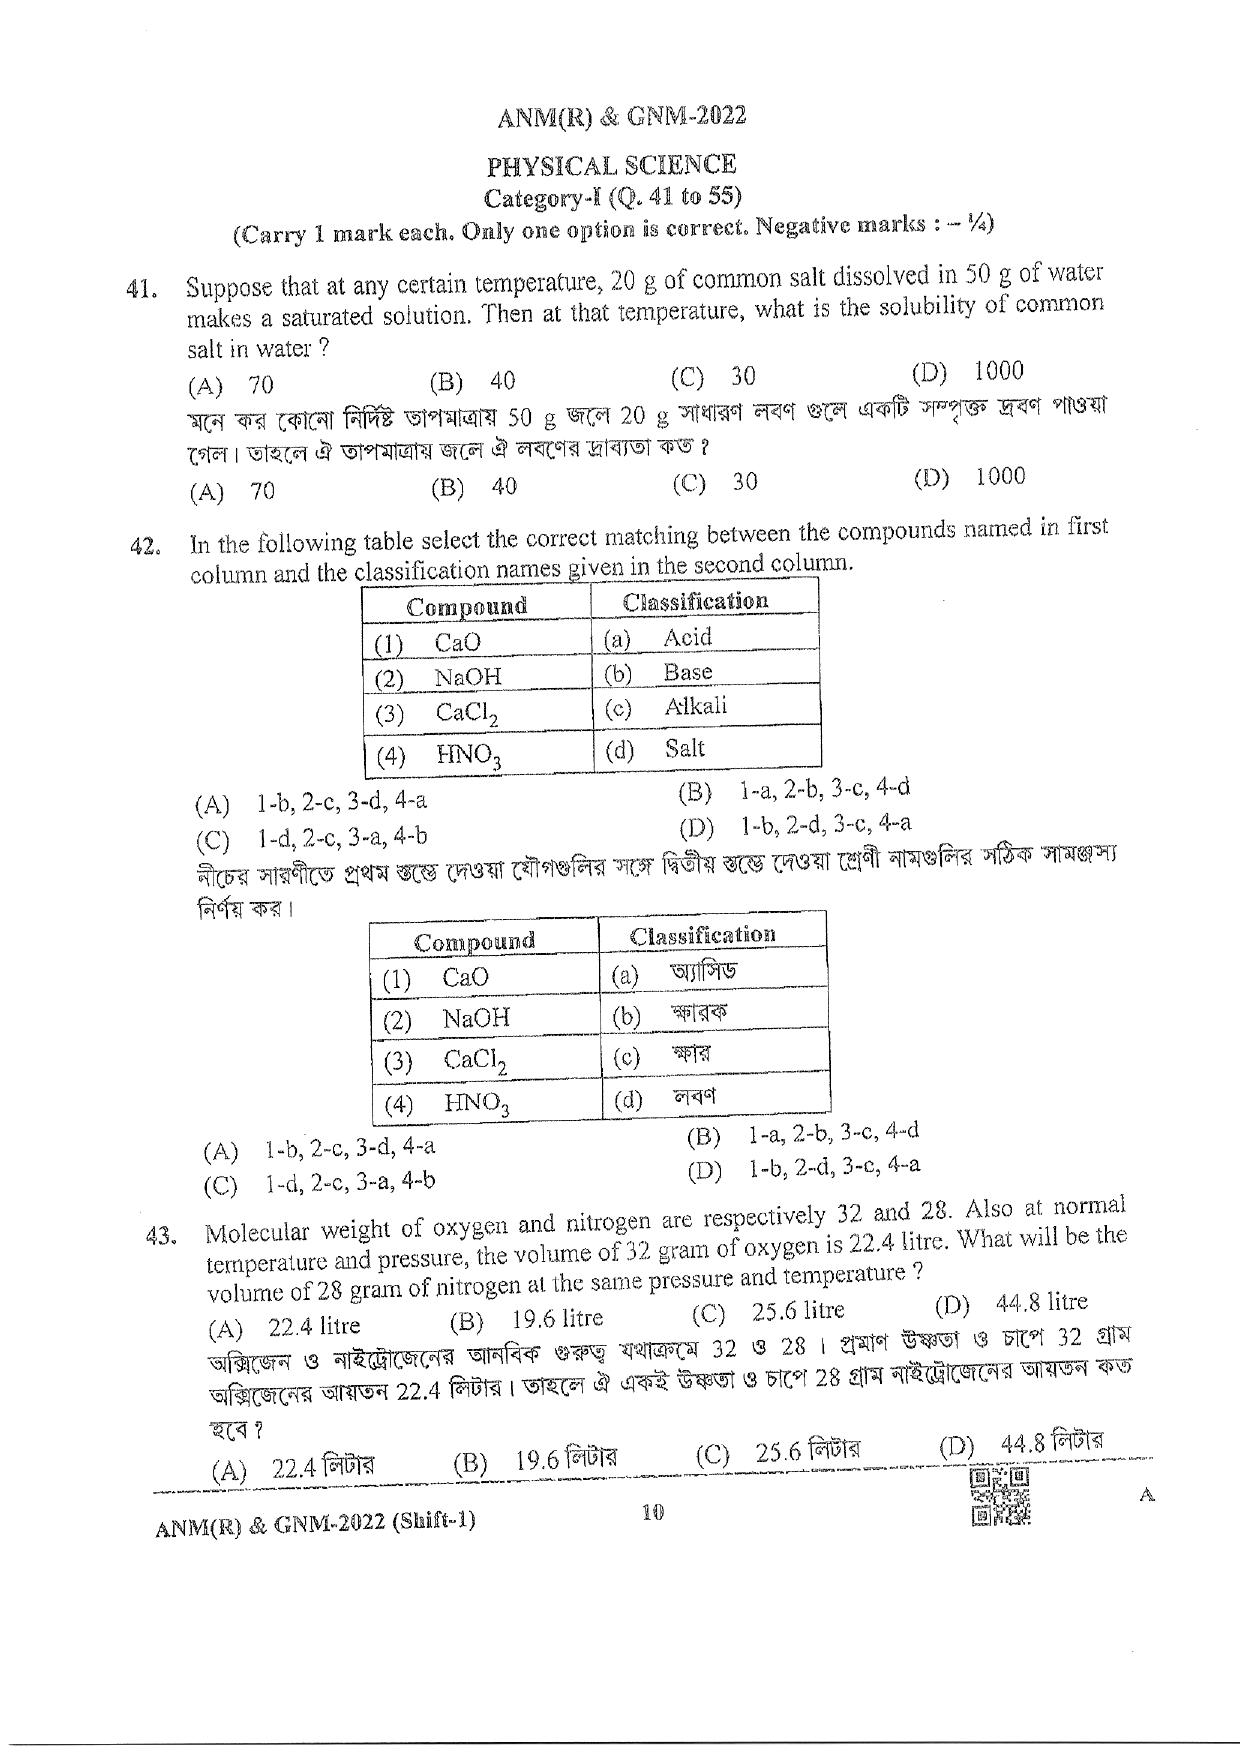 WB ANM GNM 2022 Question Paper - Page 10